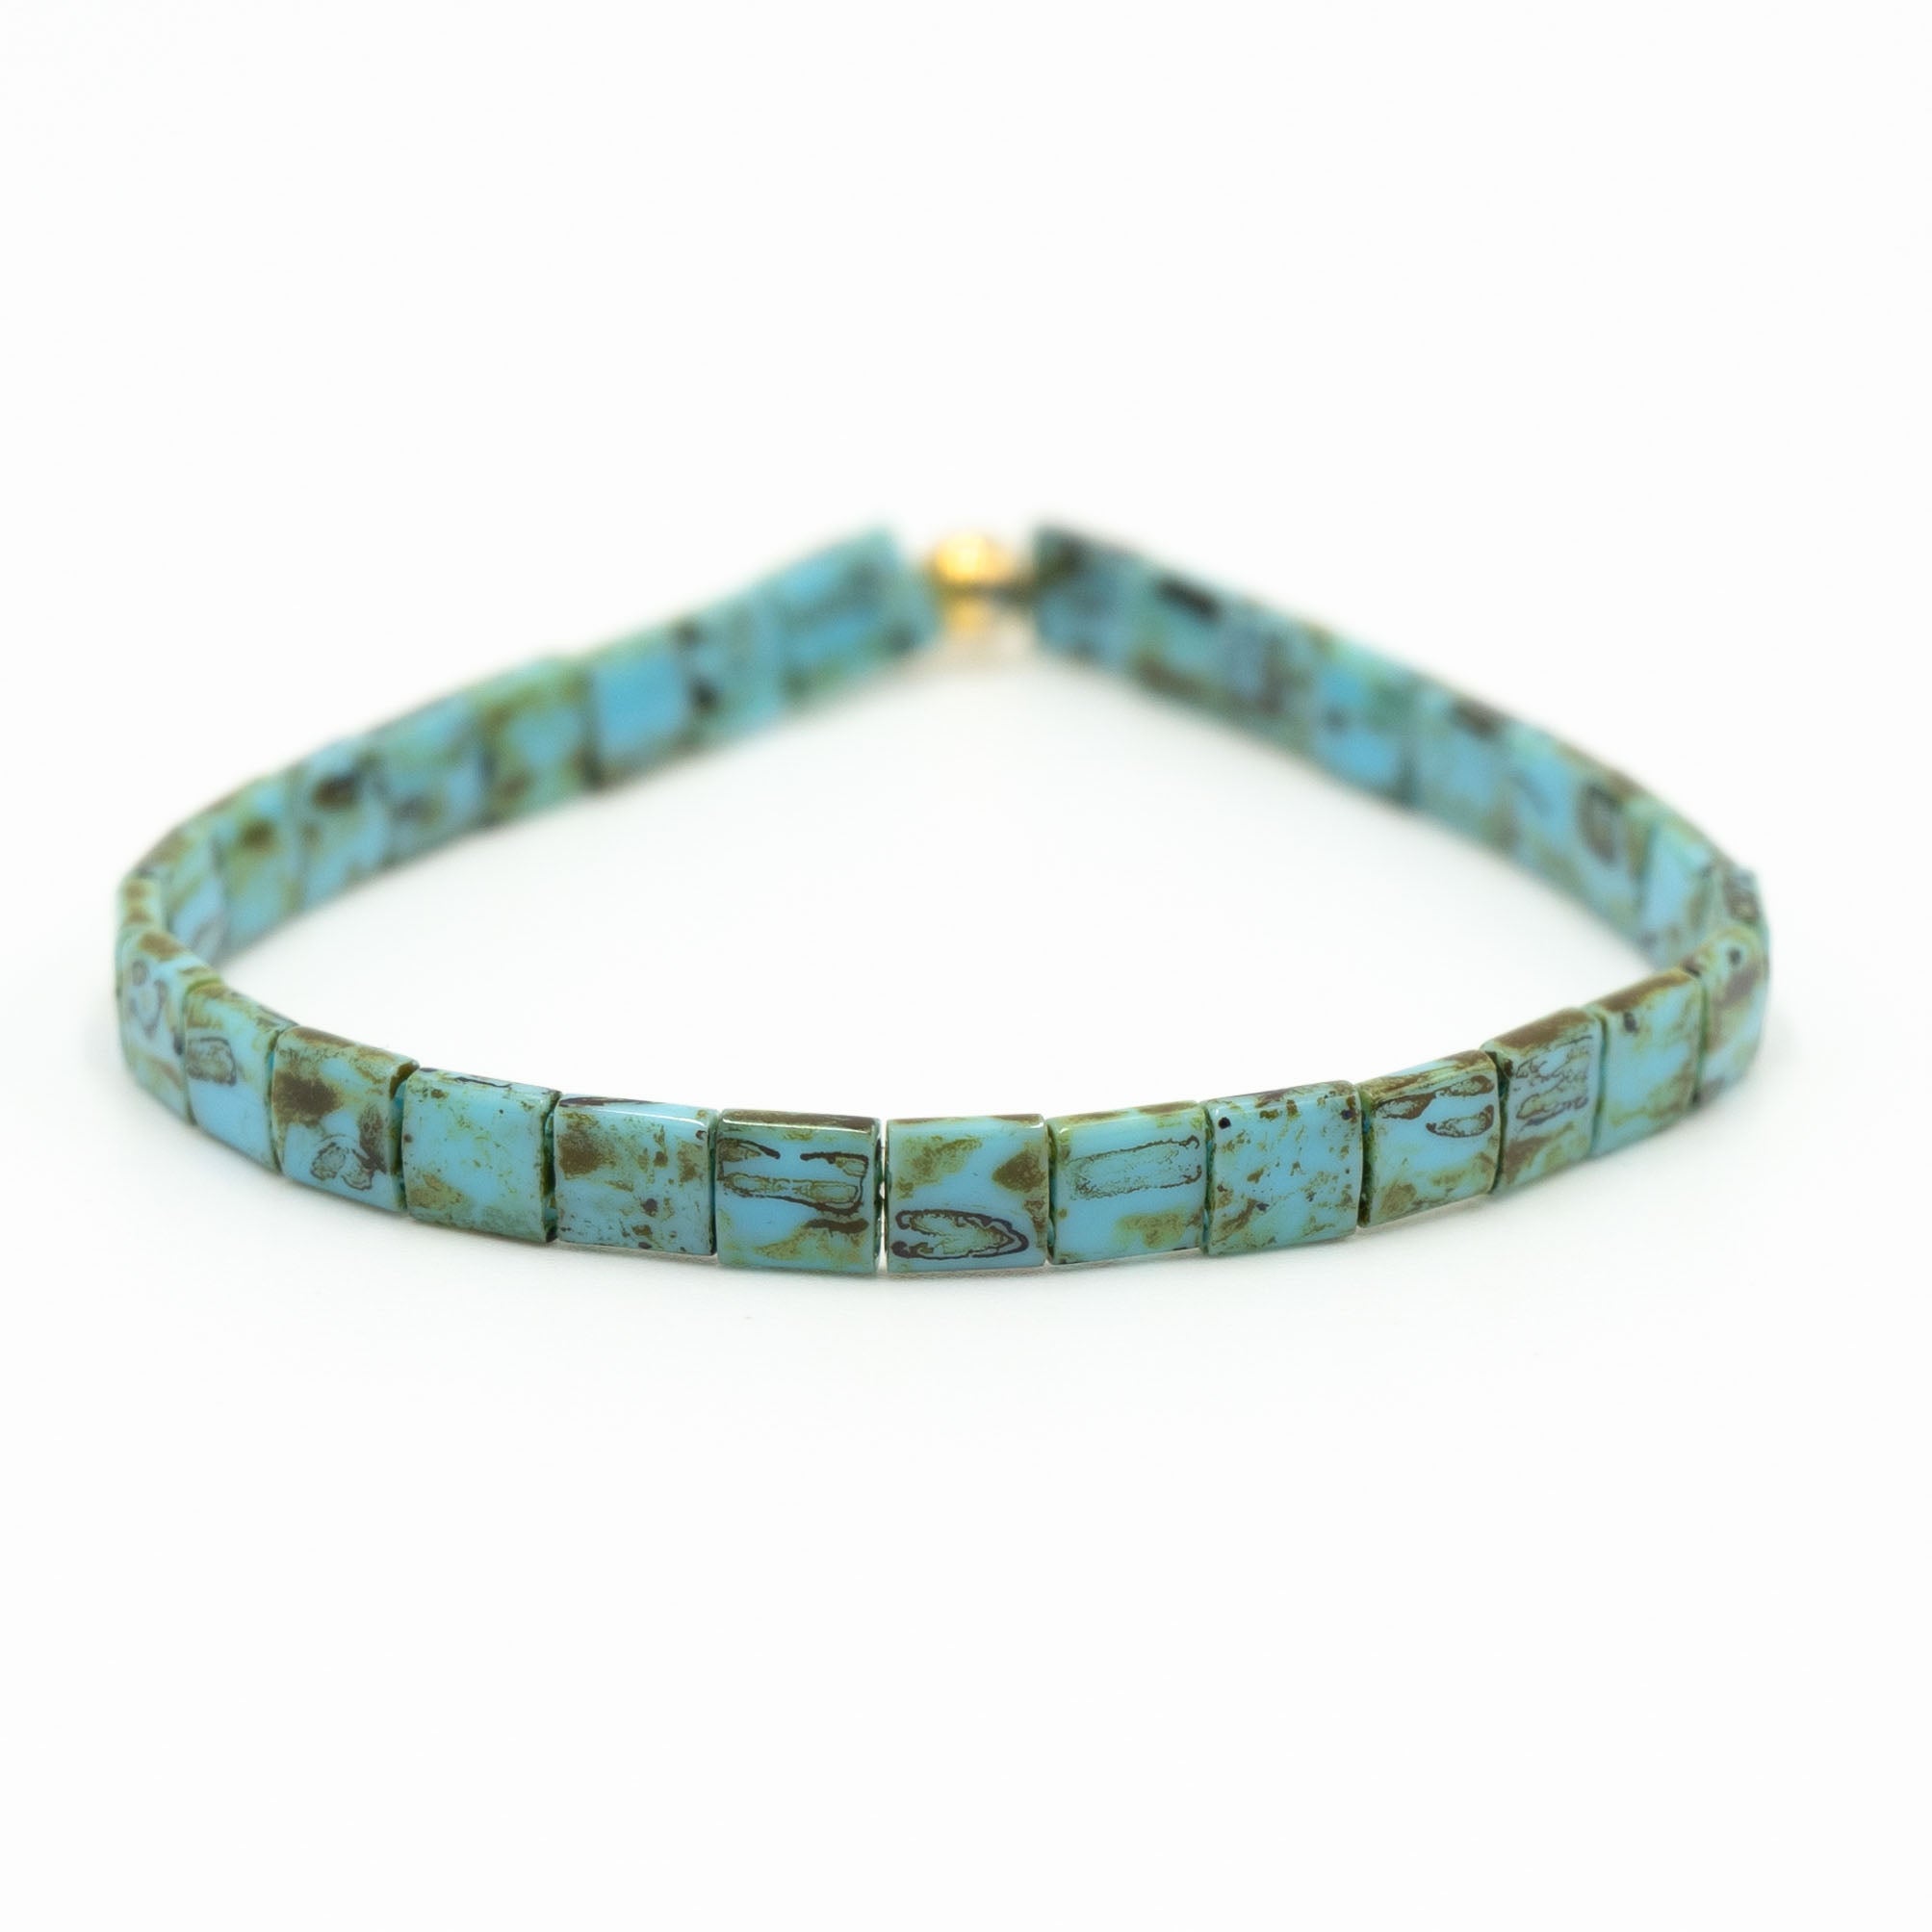 a bracelet made of turquoise beads on a white background